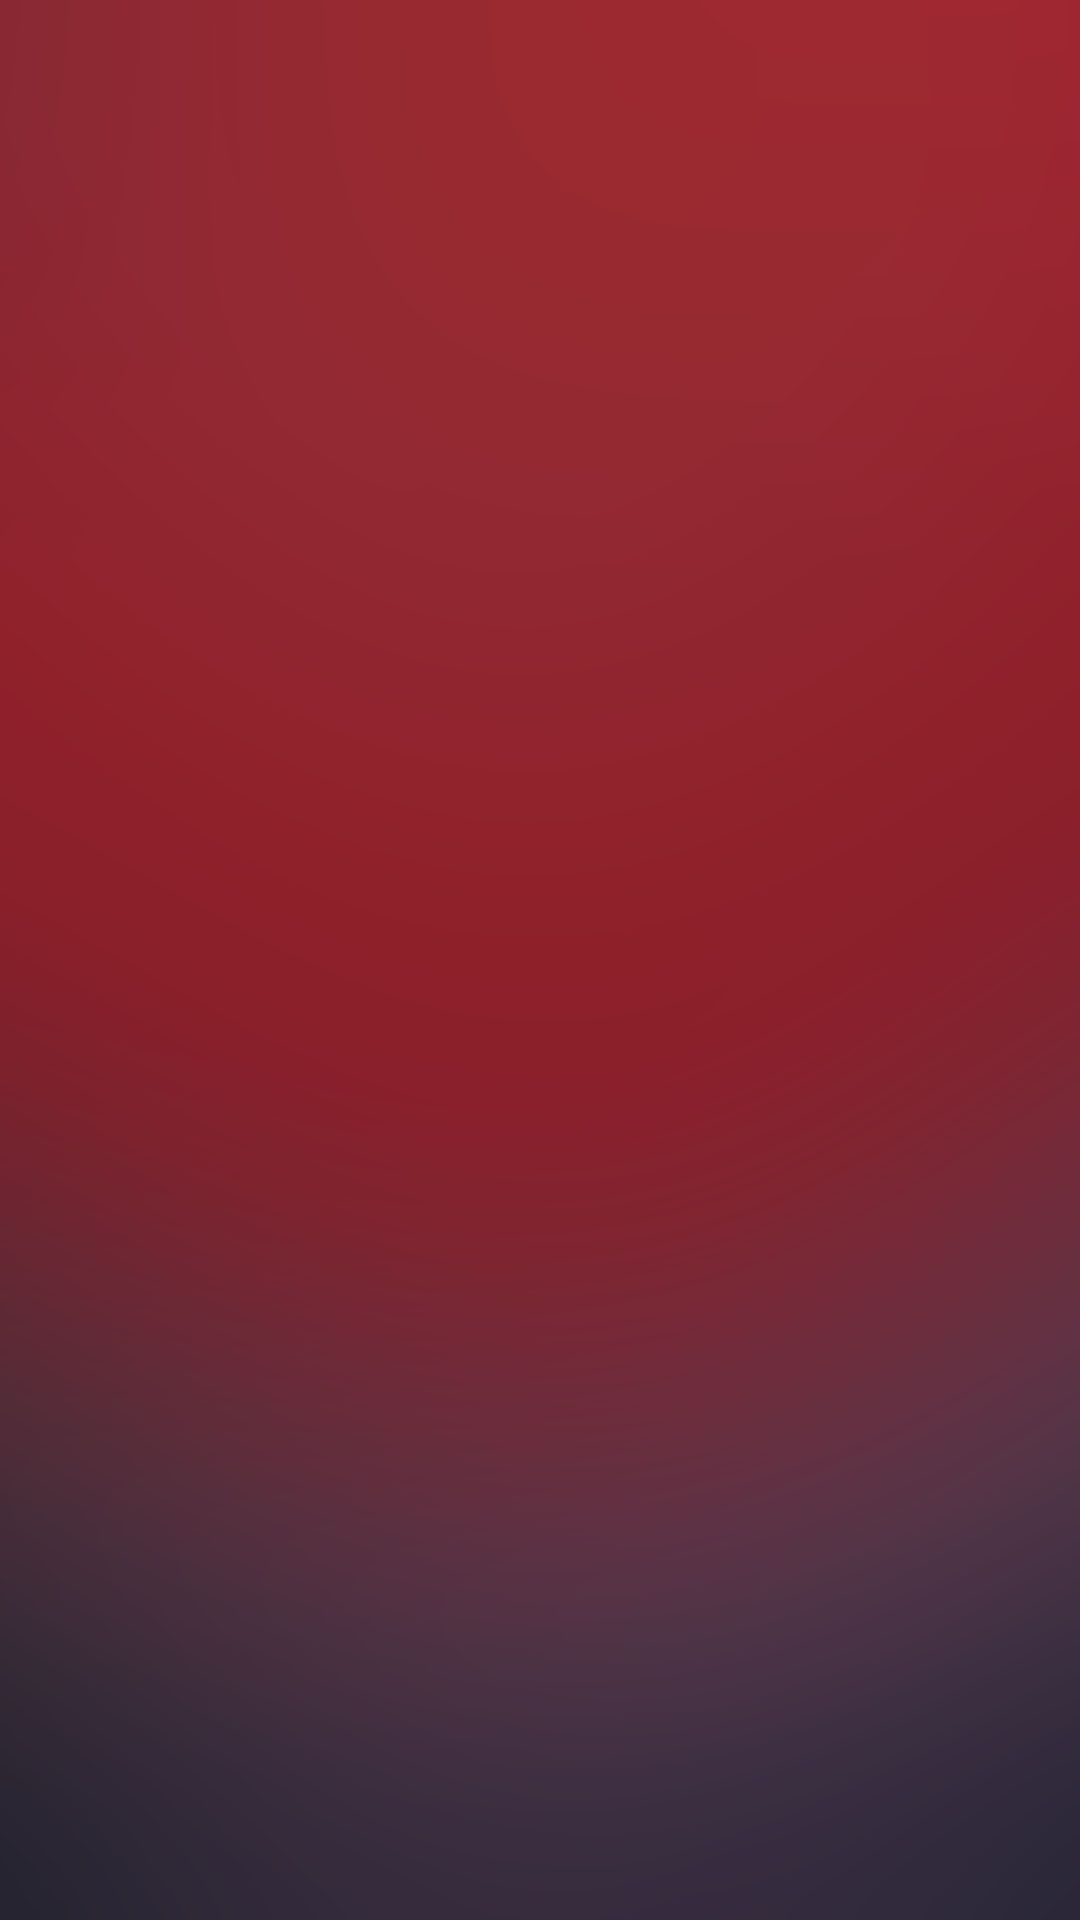 Dark Red Gradient Simple Android Wallpaper free download